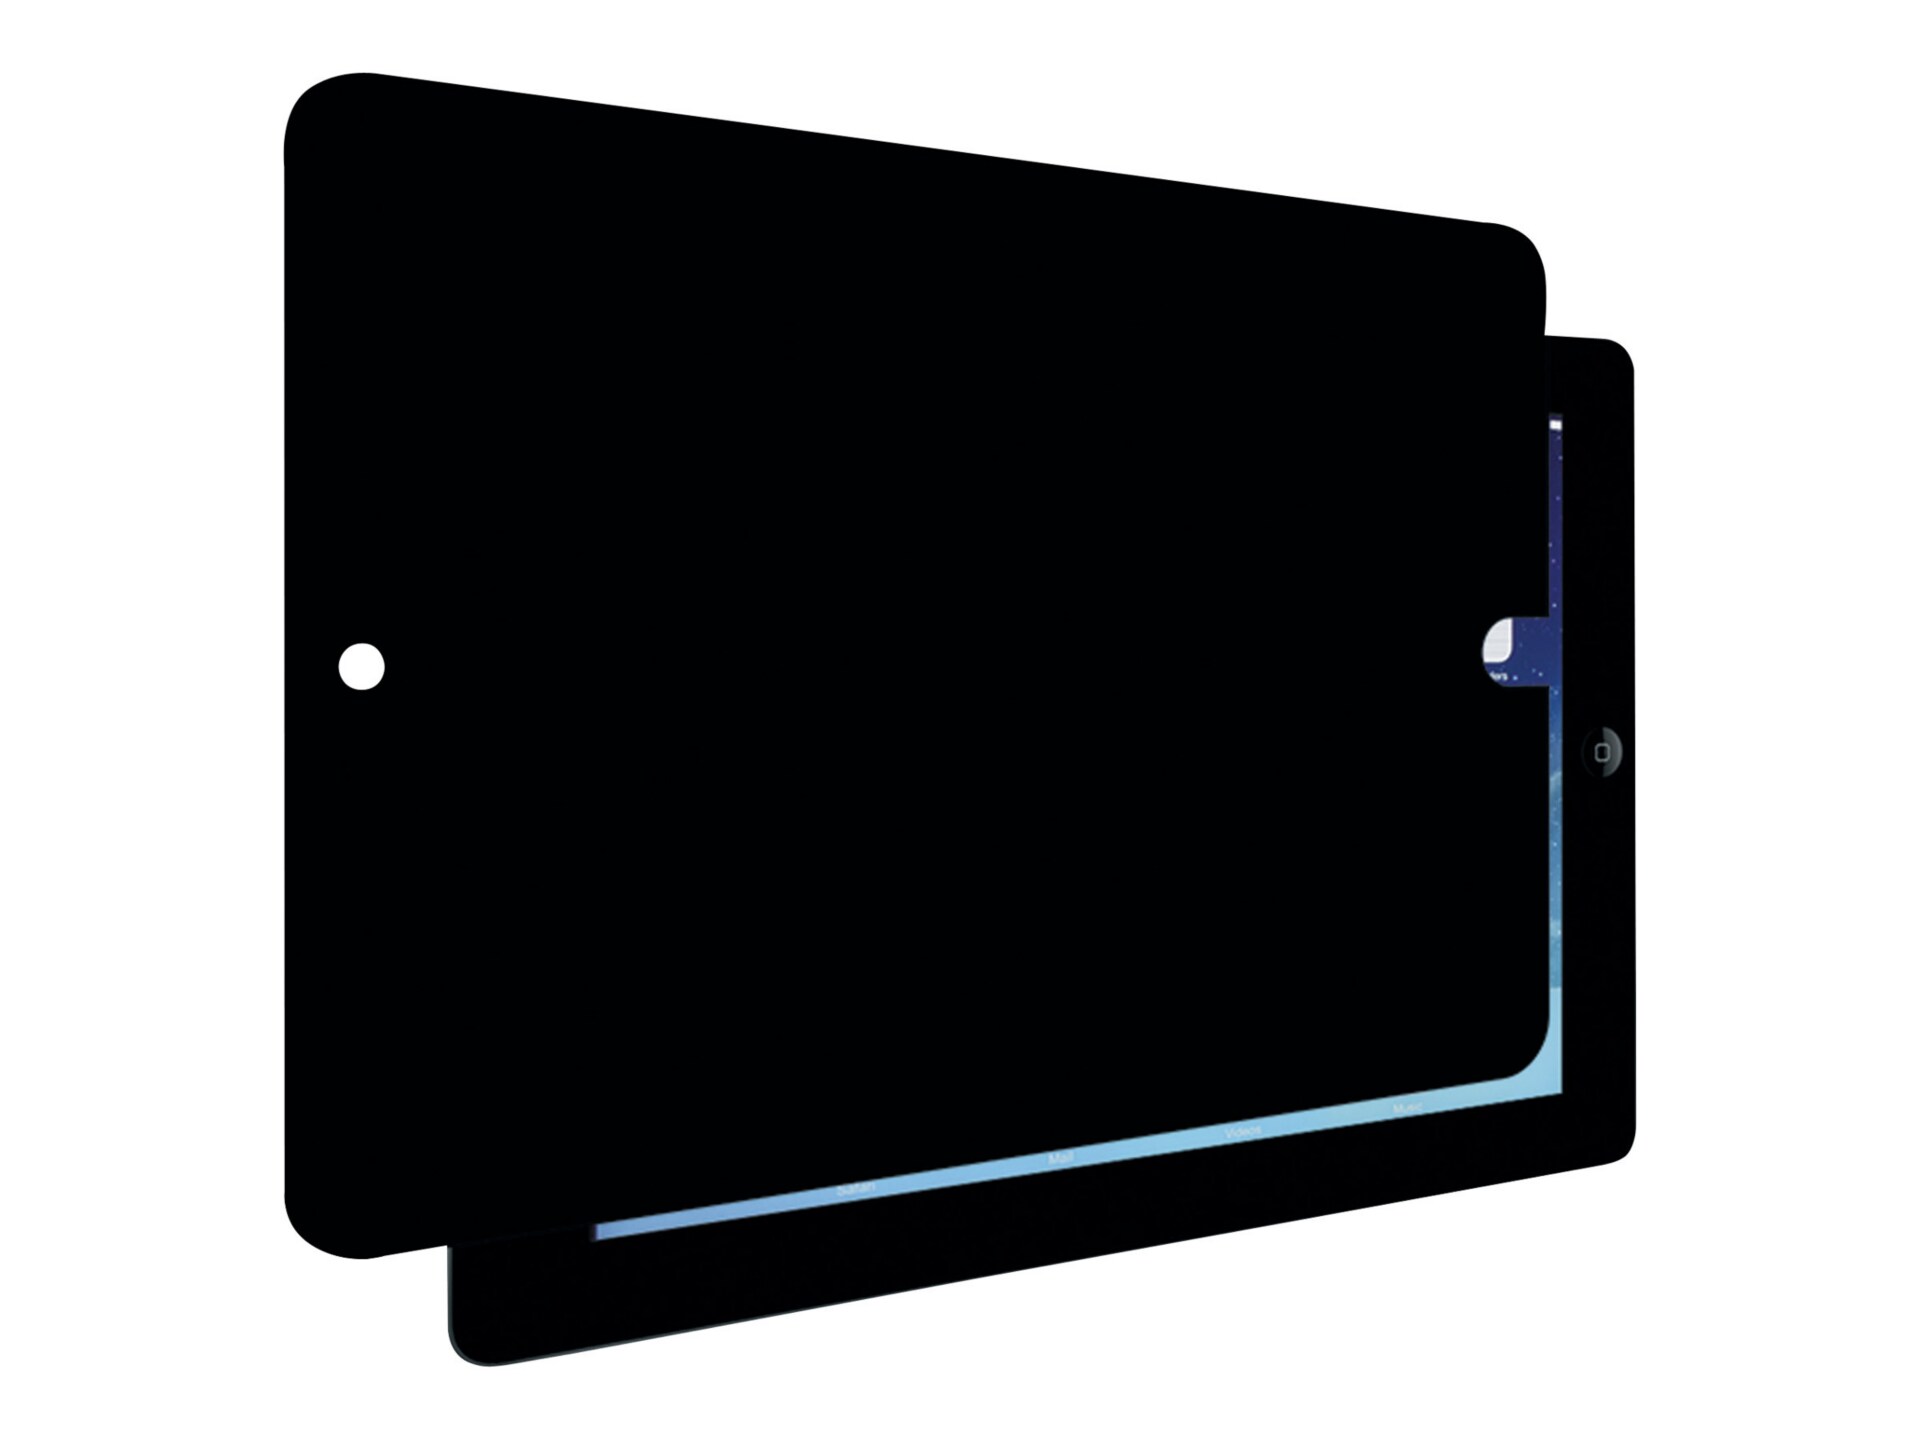 Fellowes PrivaScreen Blackout - screen protector for tablet